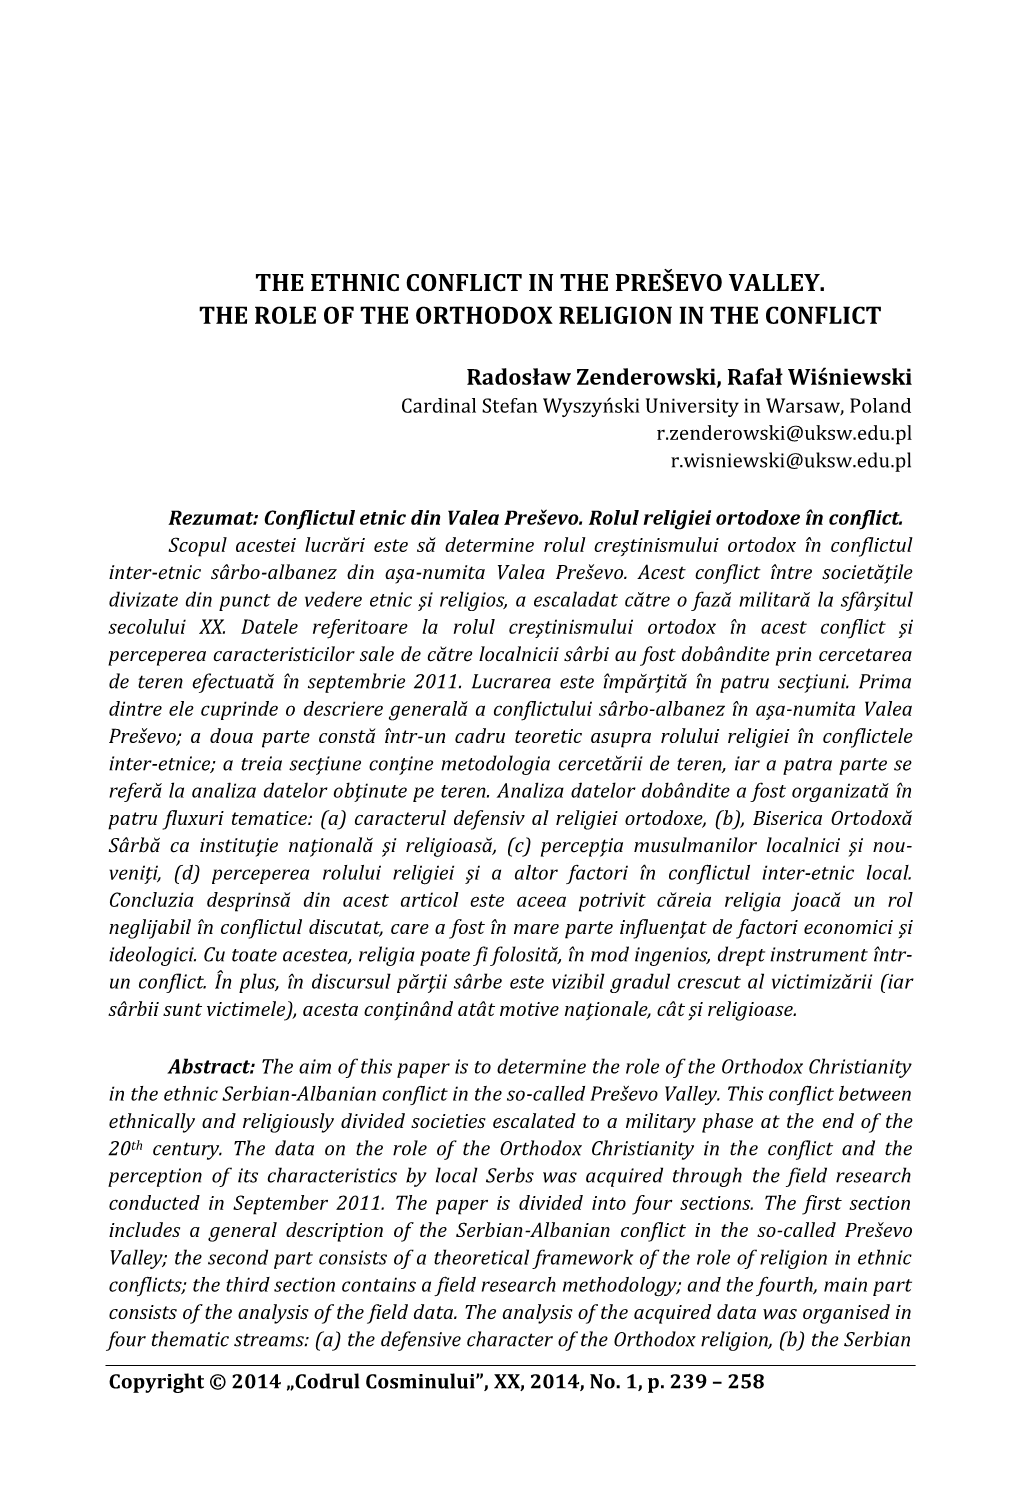 The Ethnic Conflict in the Preševo Valley